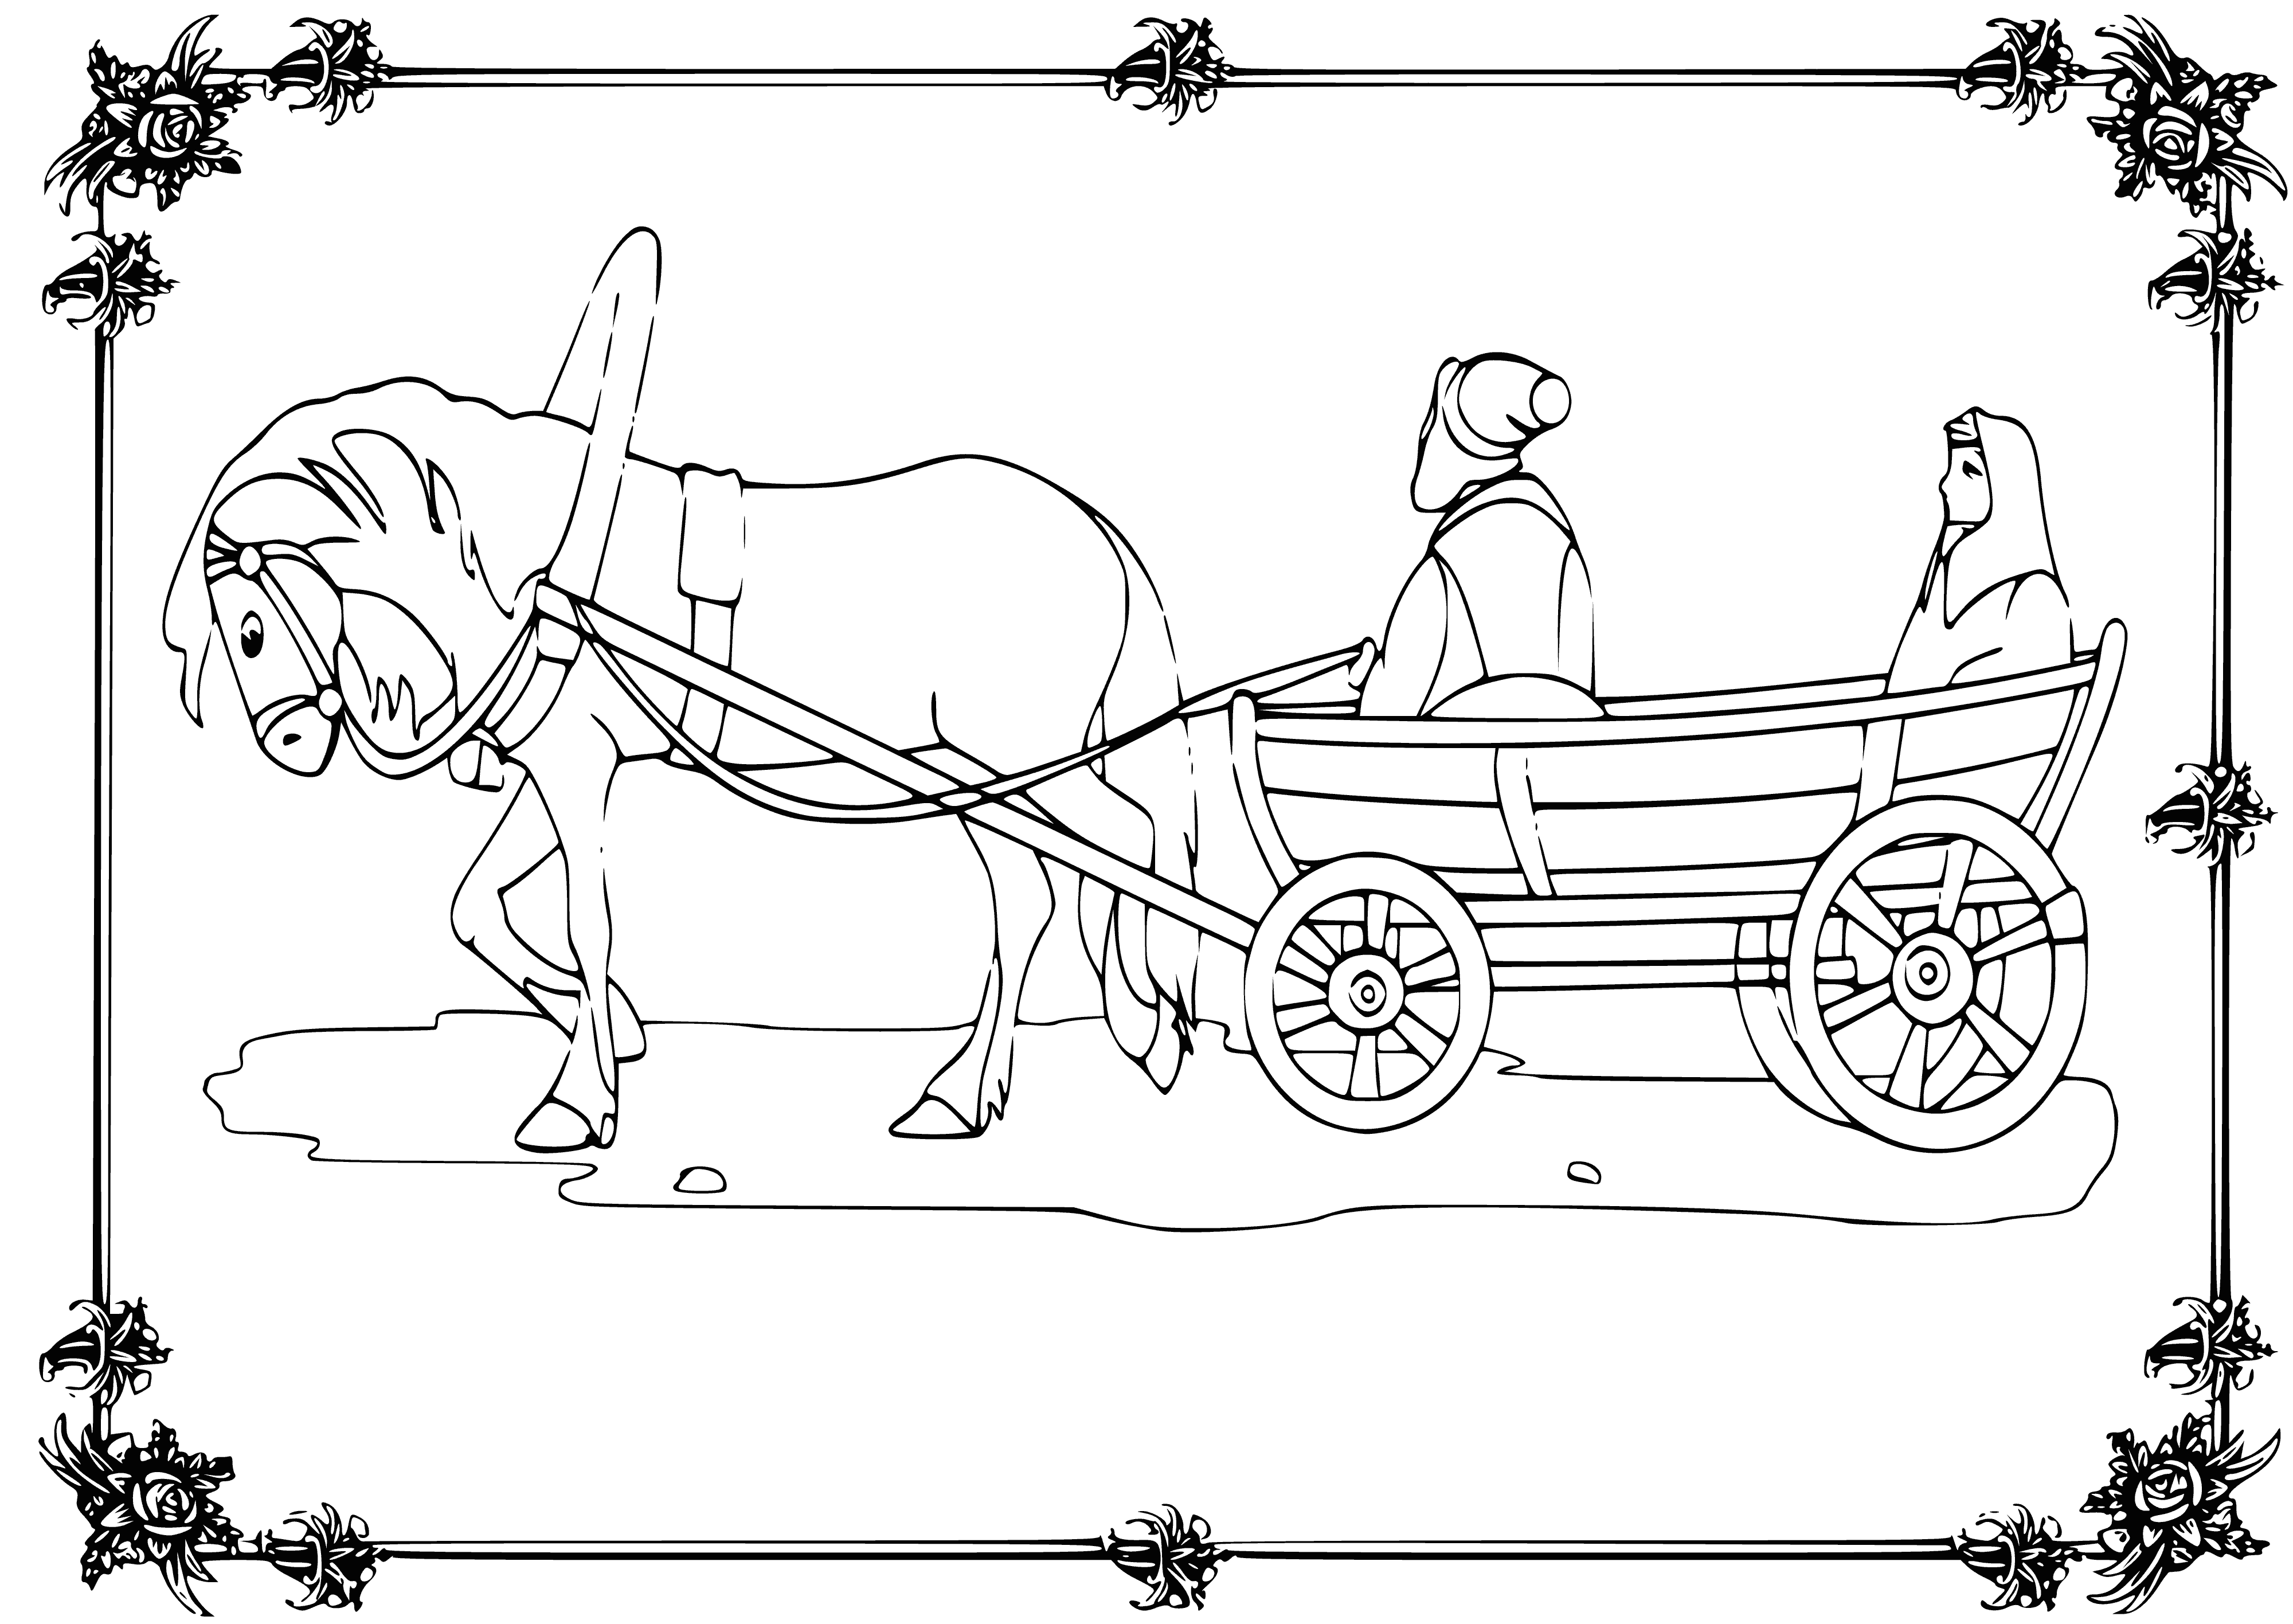 Parents are leaving coloring page